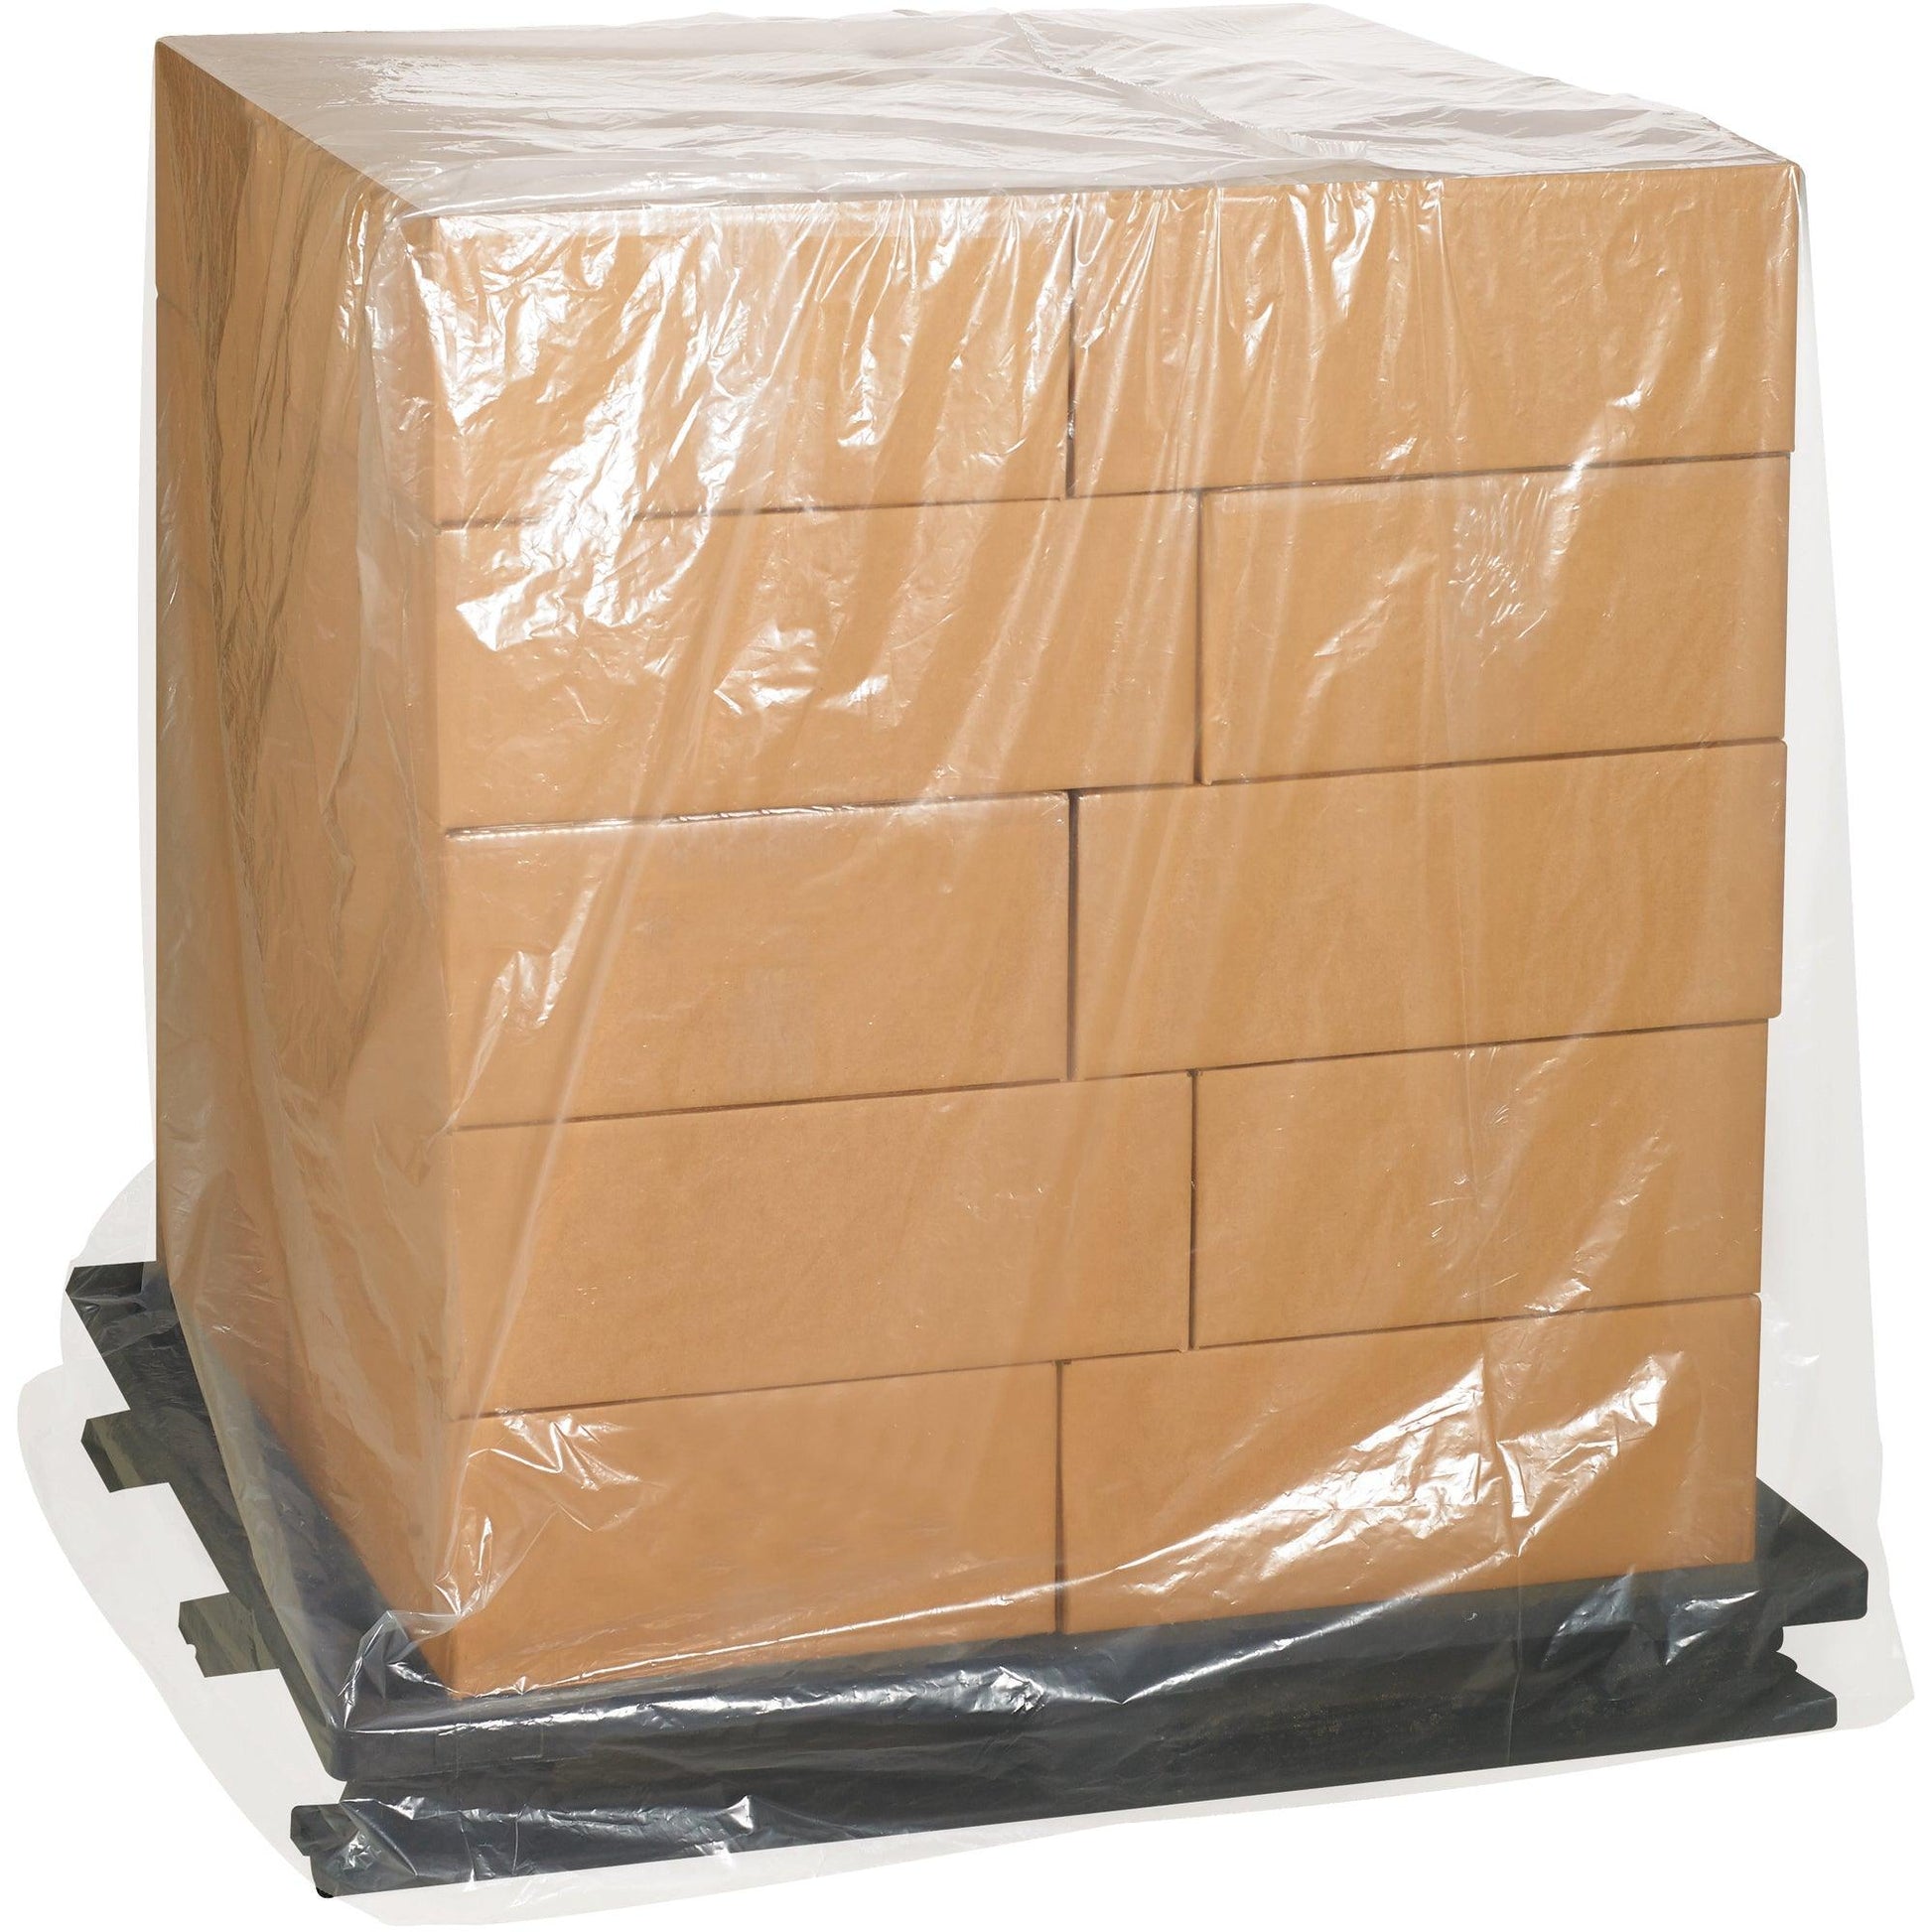 48 x 48 x 72" - 2 Mil Clear Pallet Covers - PC517